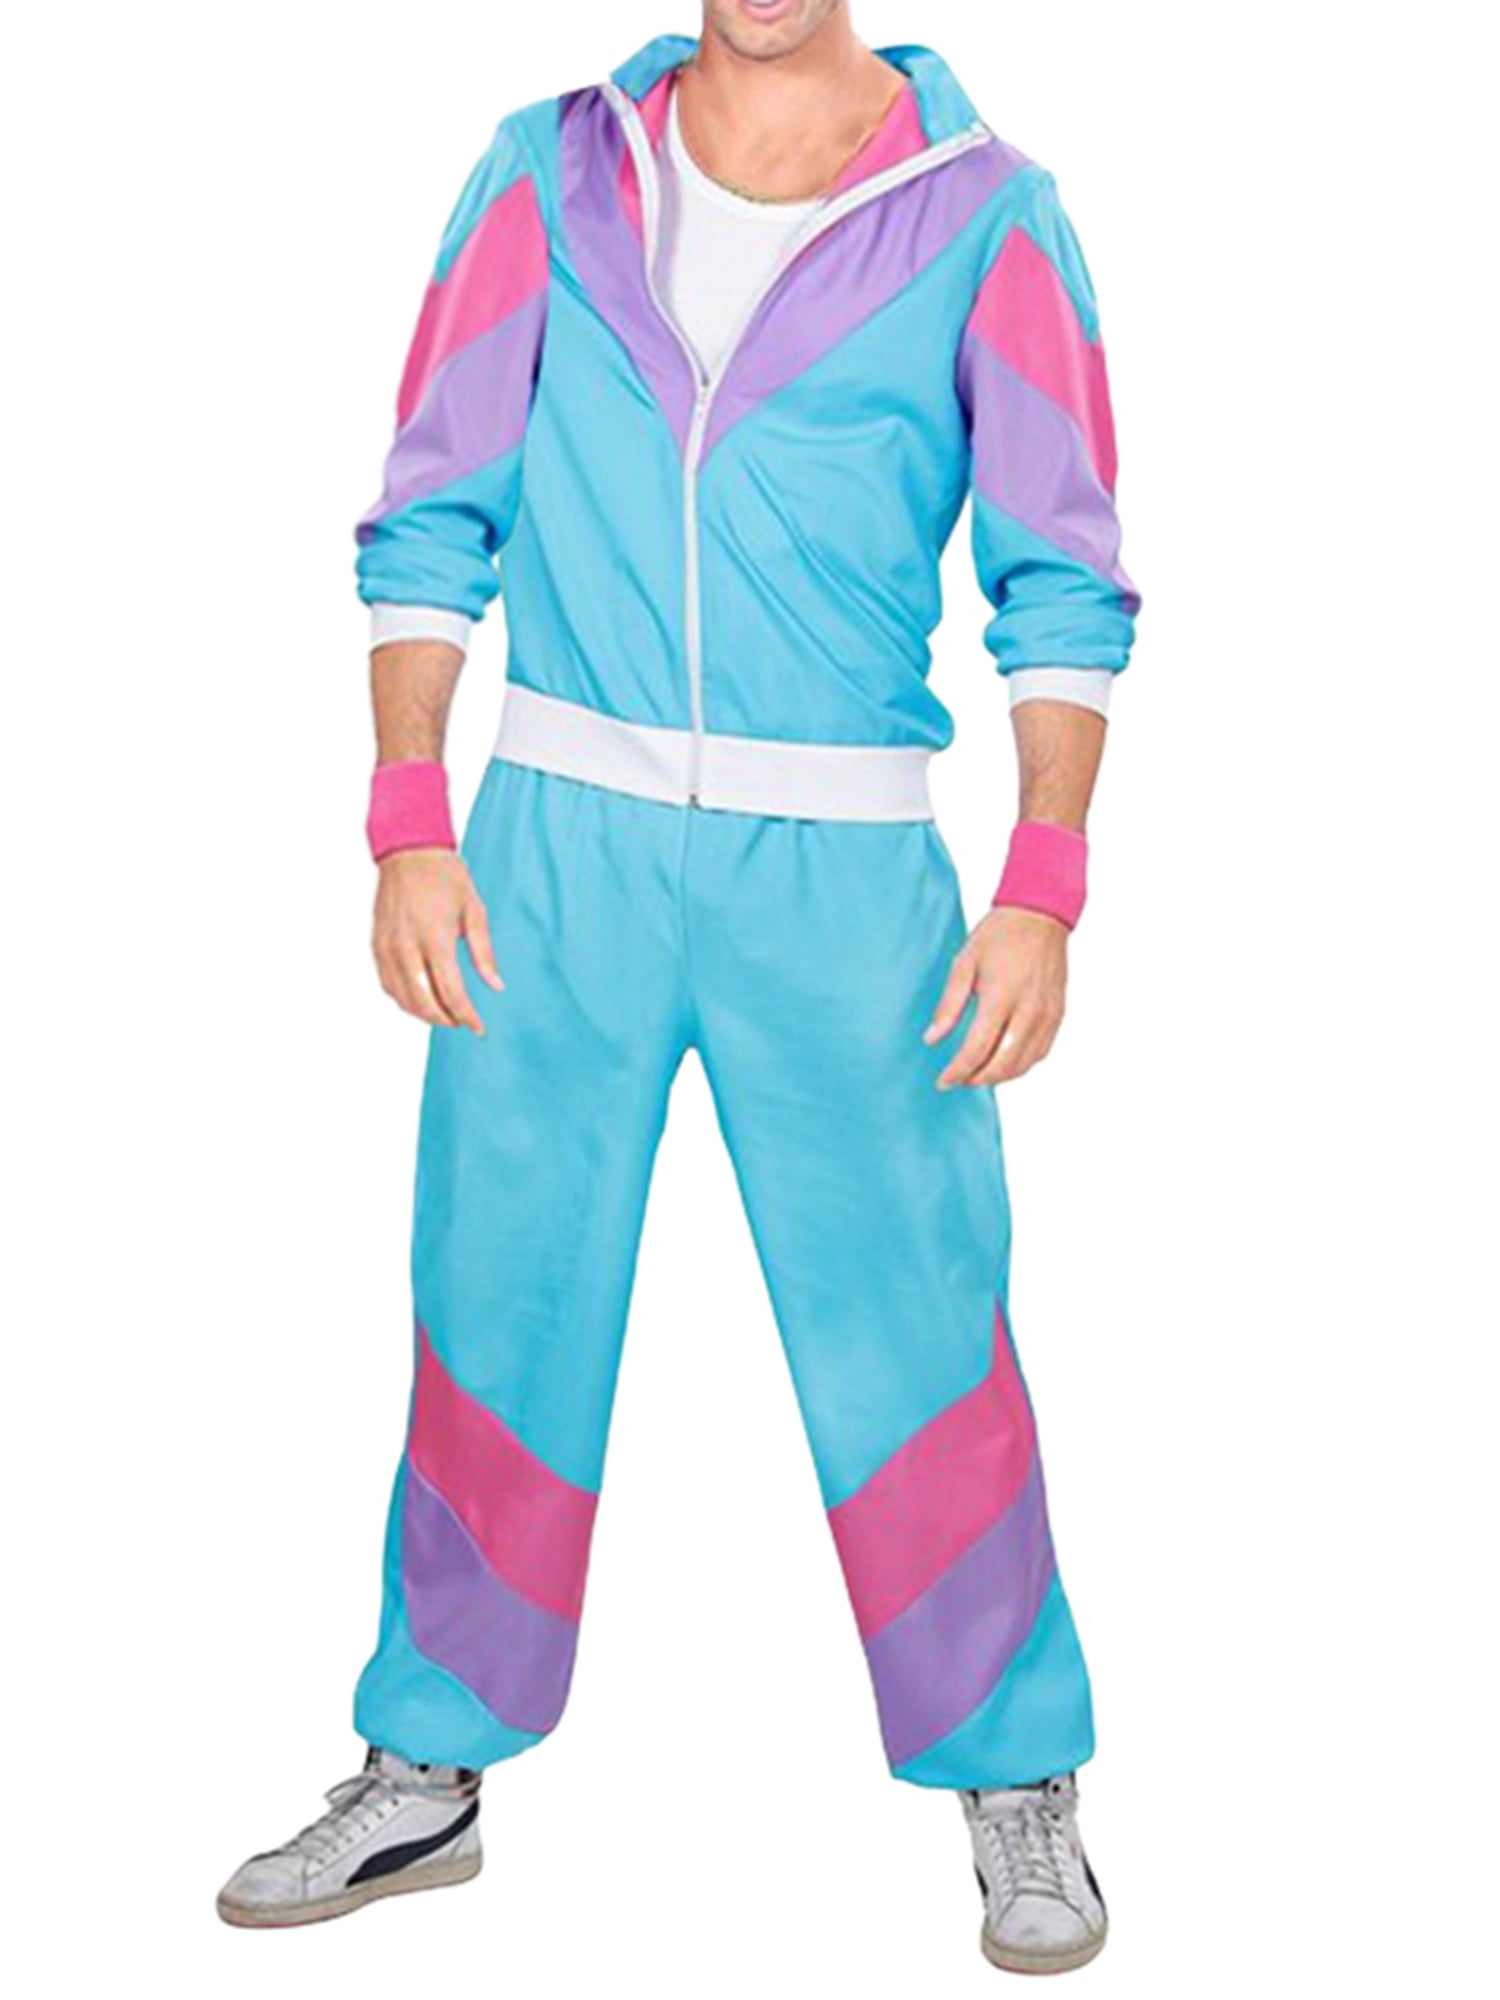 Z-B1-1 Mens 80s 90s Sweat Tracksuit Costume Shell Suit Retro Outfit